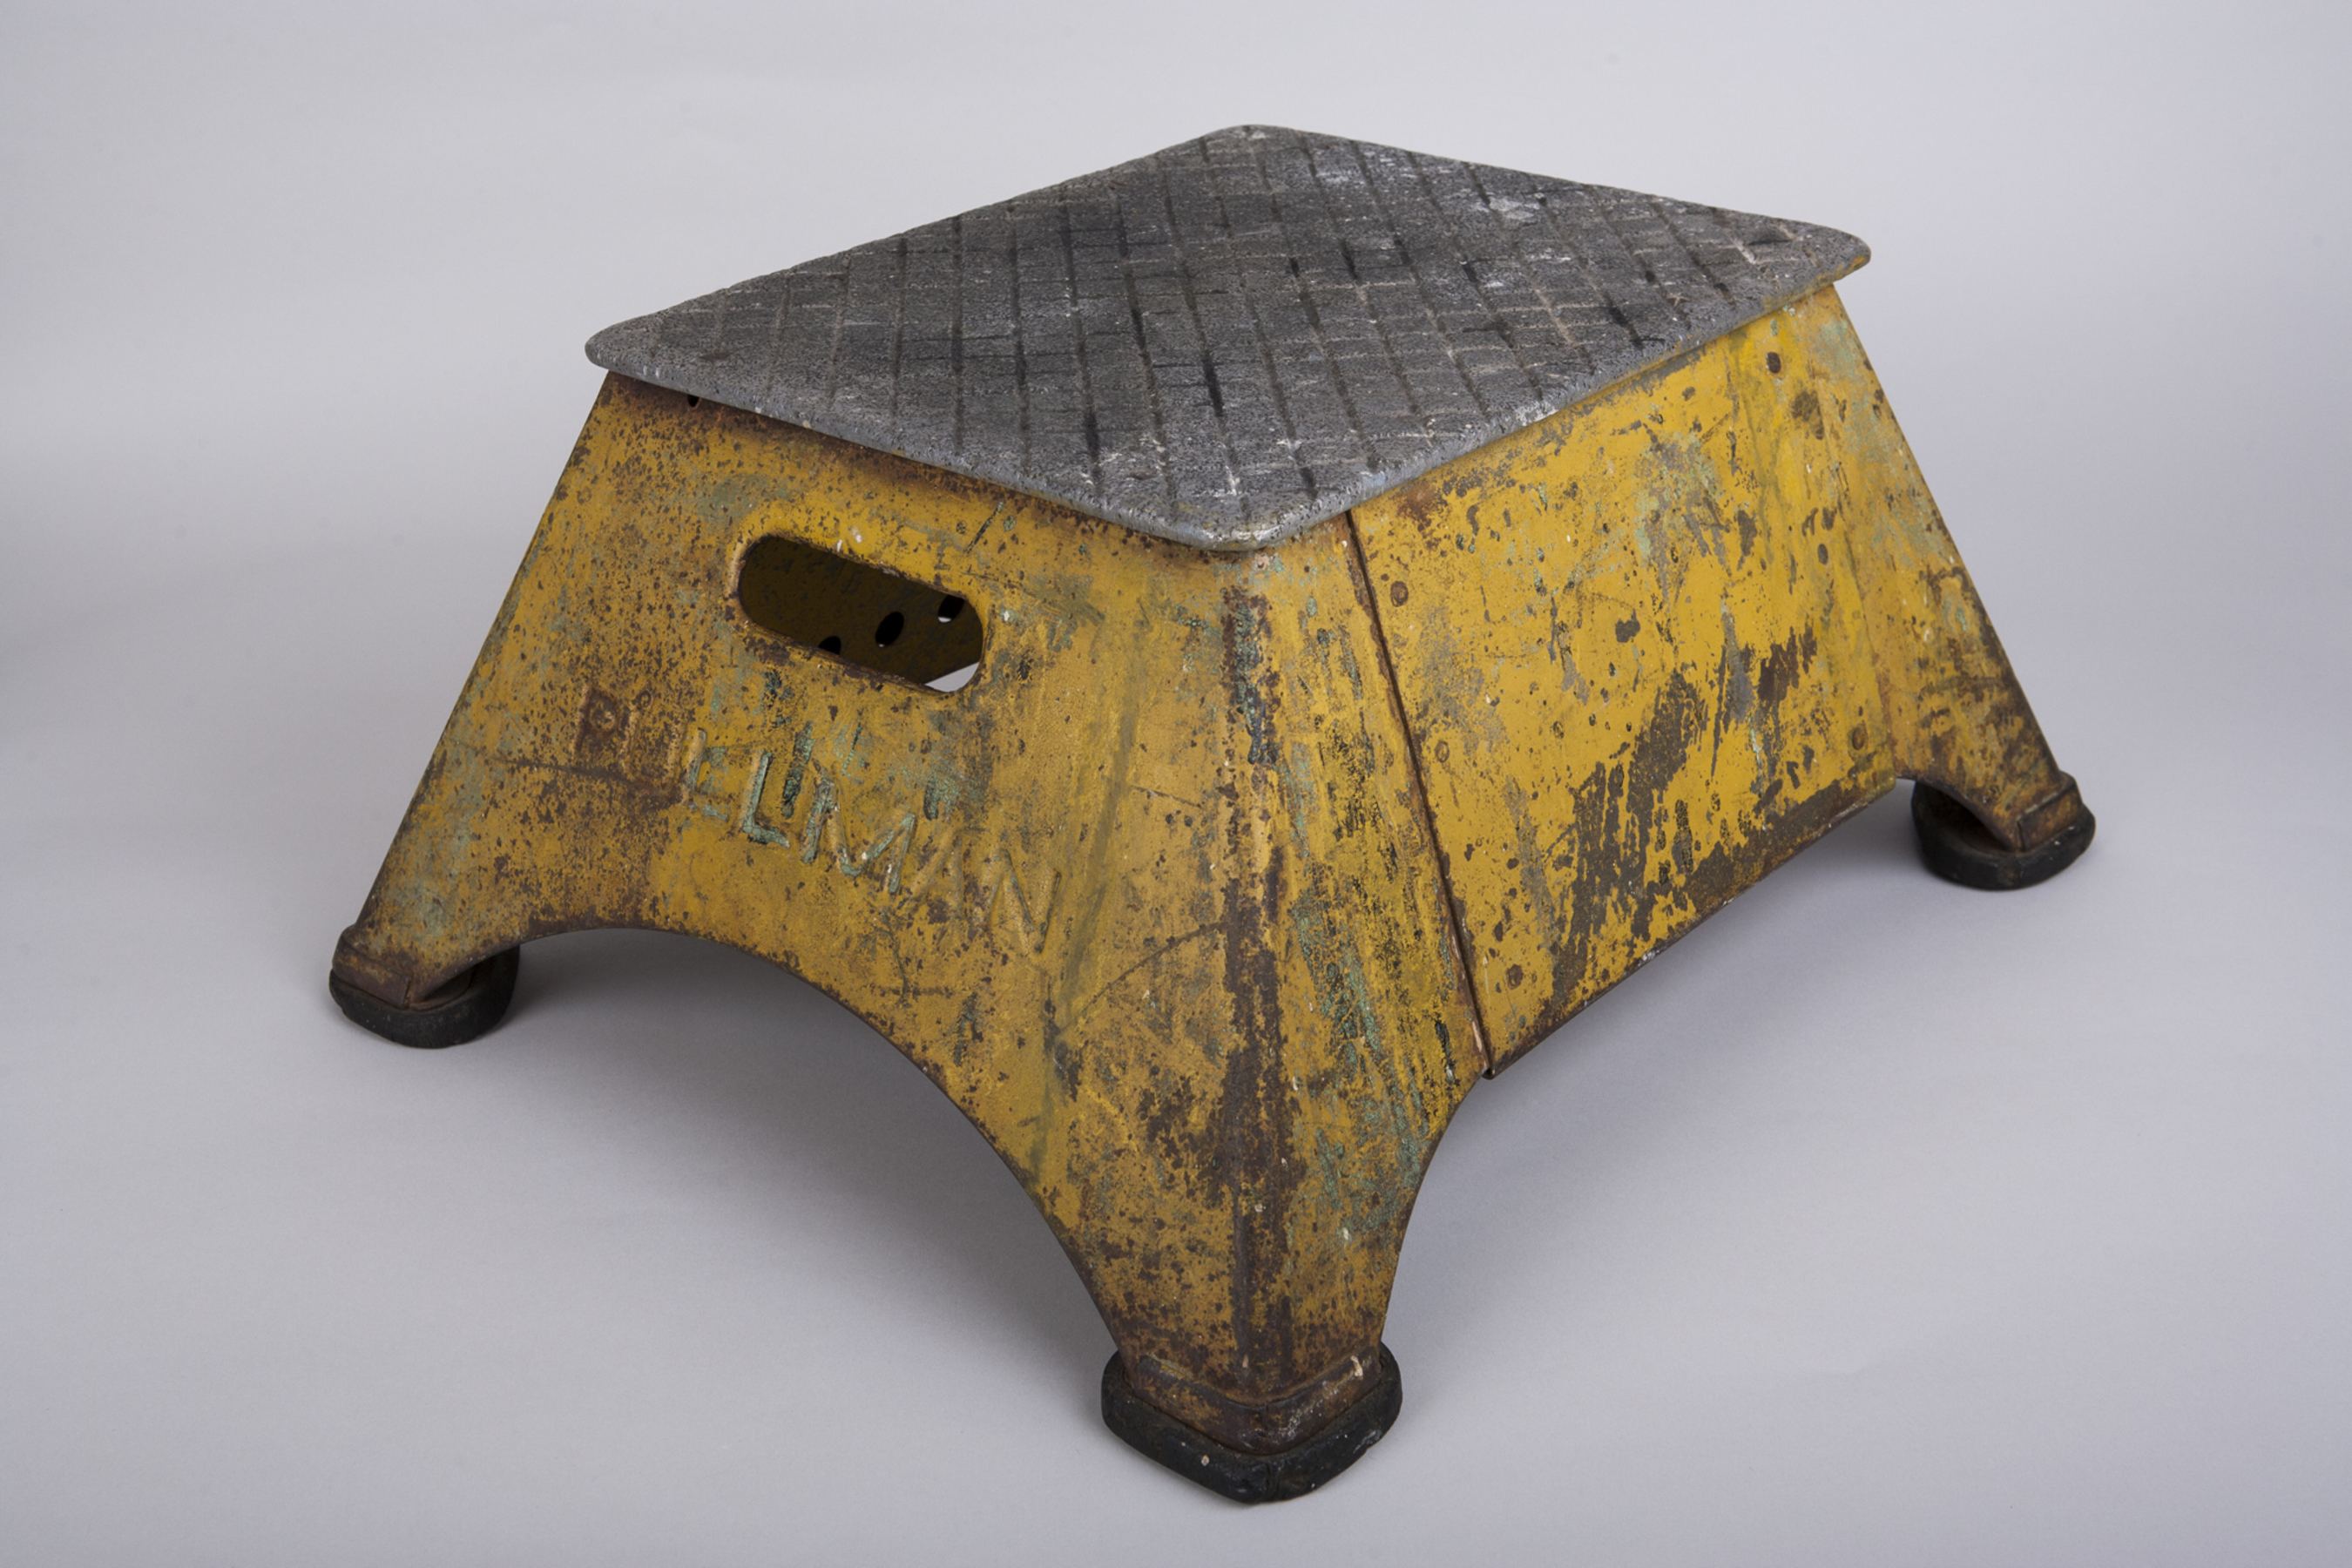 This stepstool was used by Pullman porters -- black railroad attendants who worked on Pullman sleeping cars in the 20th century -- to assist passengers, left. The porters spread copies of The Chicago Defender throughout the South, helping to promote the Great Migration of blacks to the North.
Image credit: Sarah Mercier/Newseum; stool: Loan, Smithsonian National Museum of African American History & Culture (PRNewsFoto/Newseum)